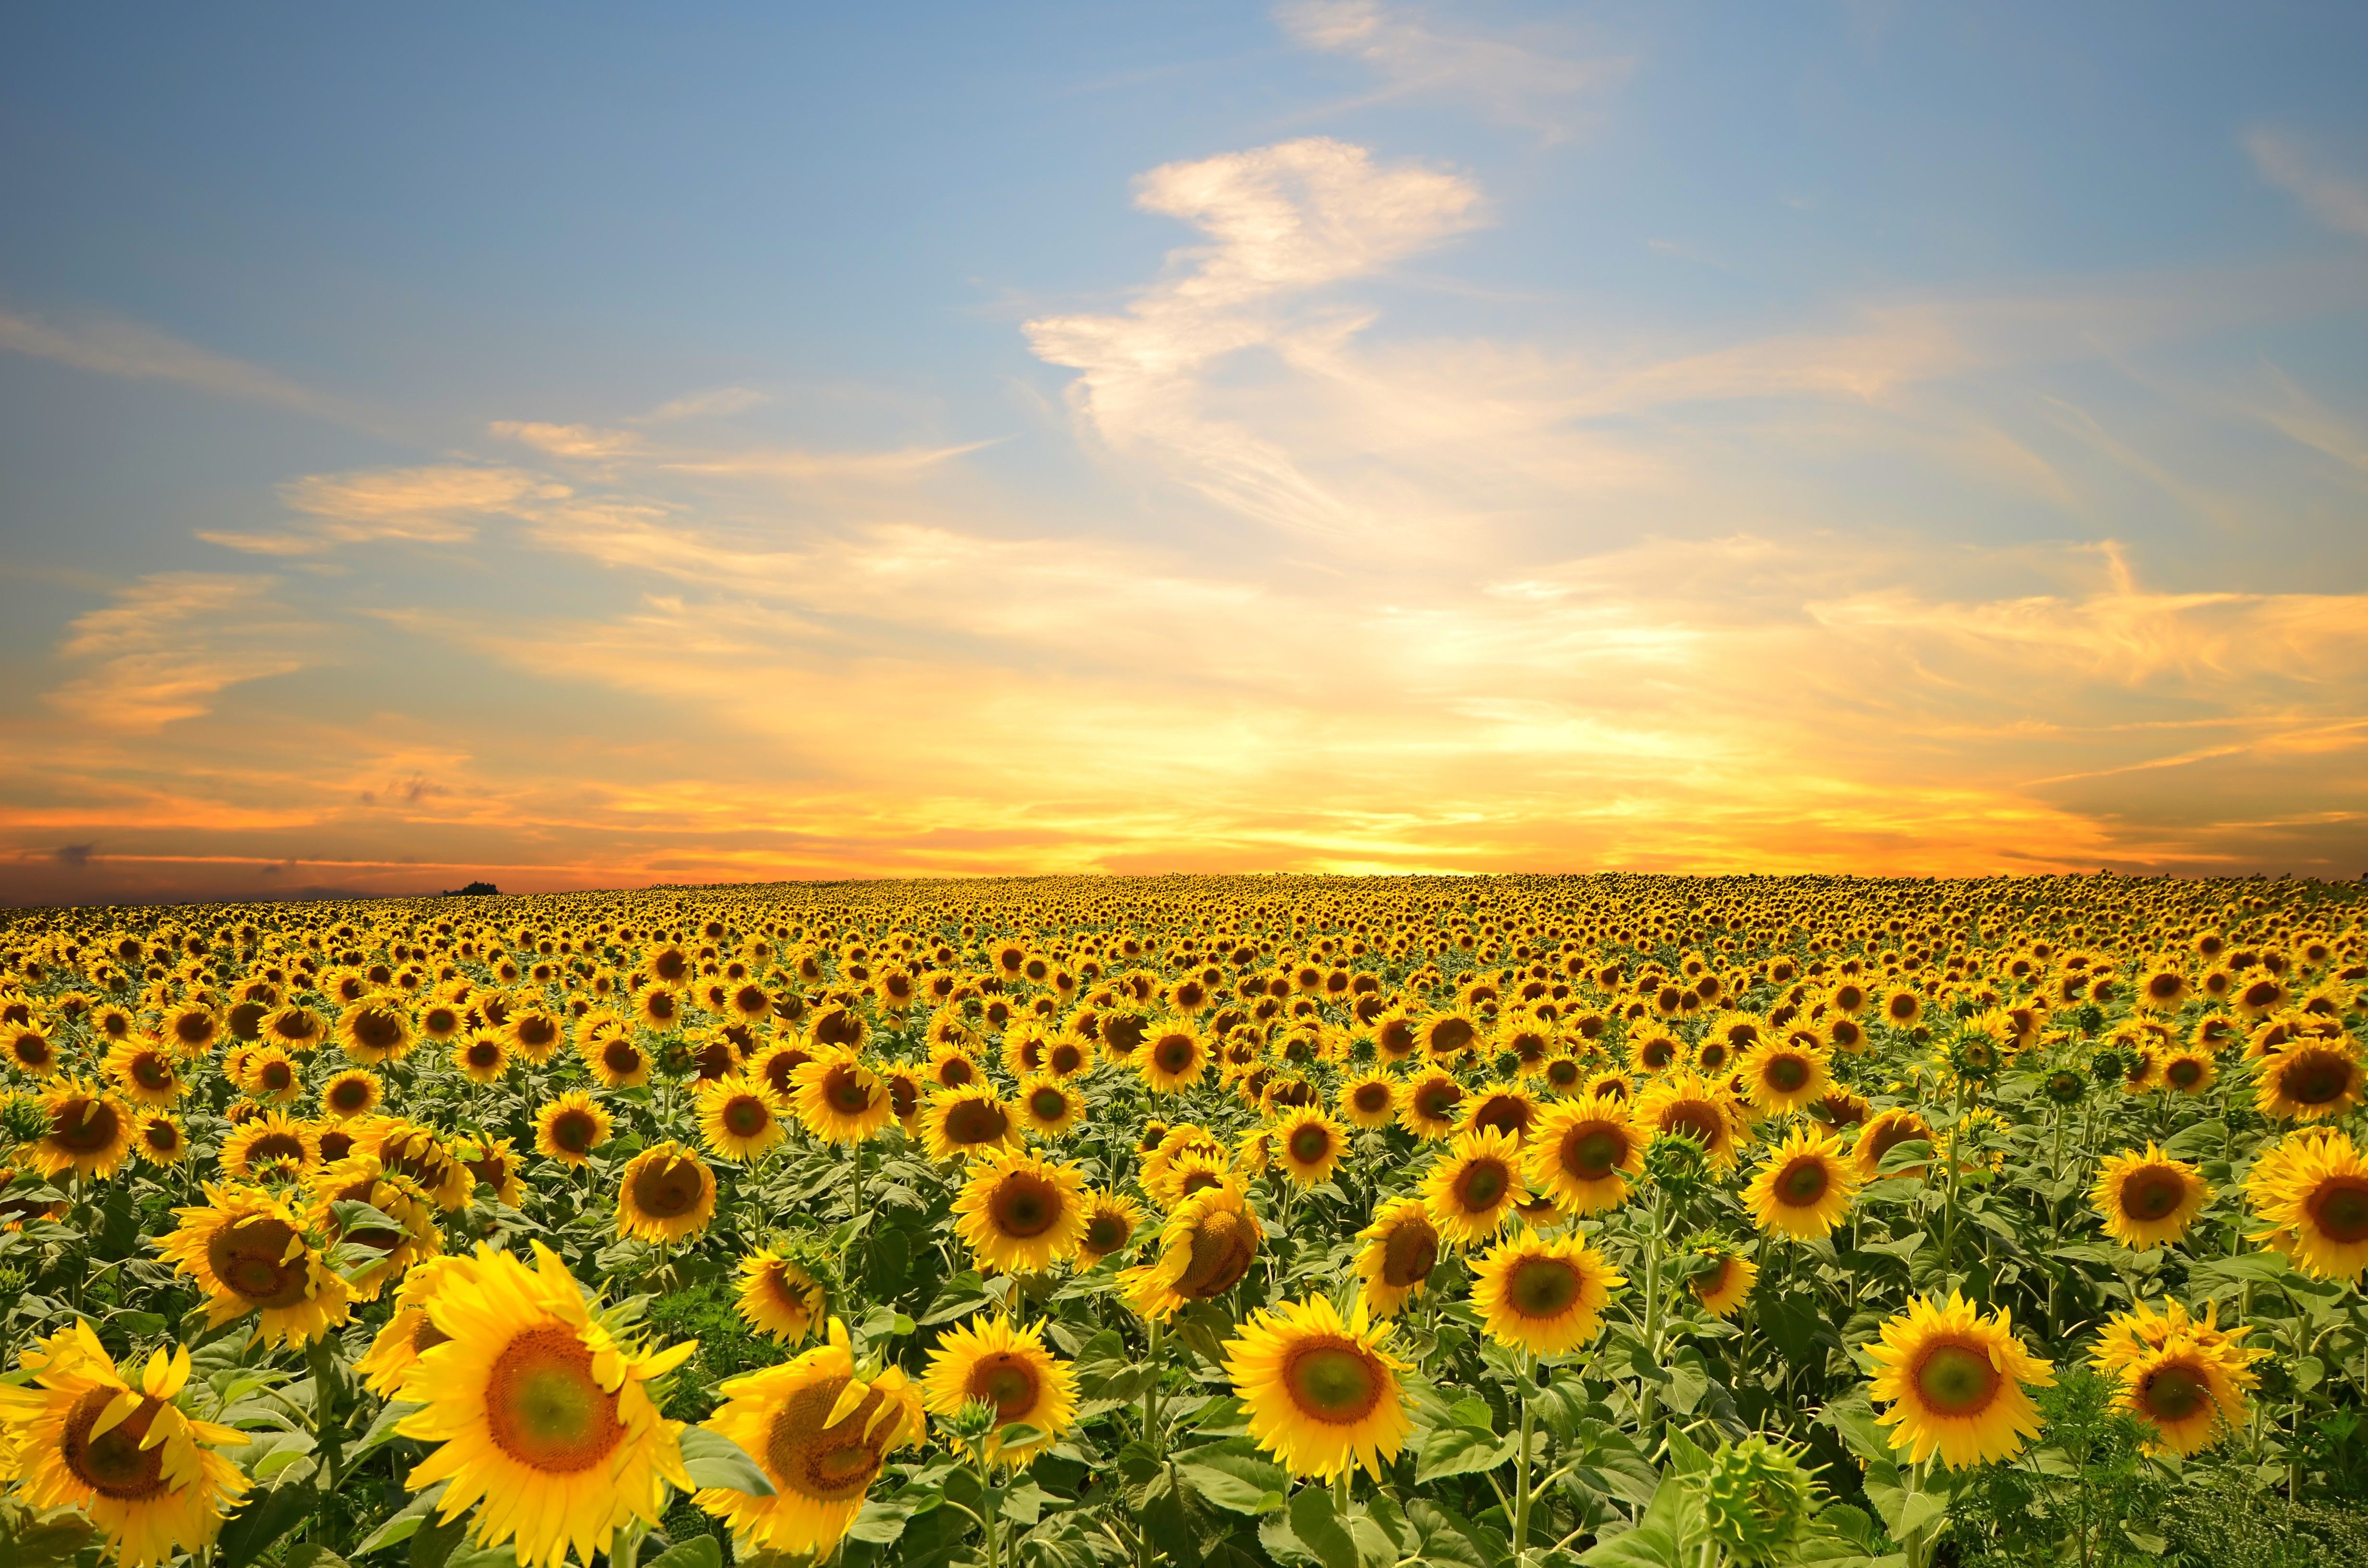 sunflower sunset wallpapers wallpaper cave on sunflowers at sunset wallpapers